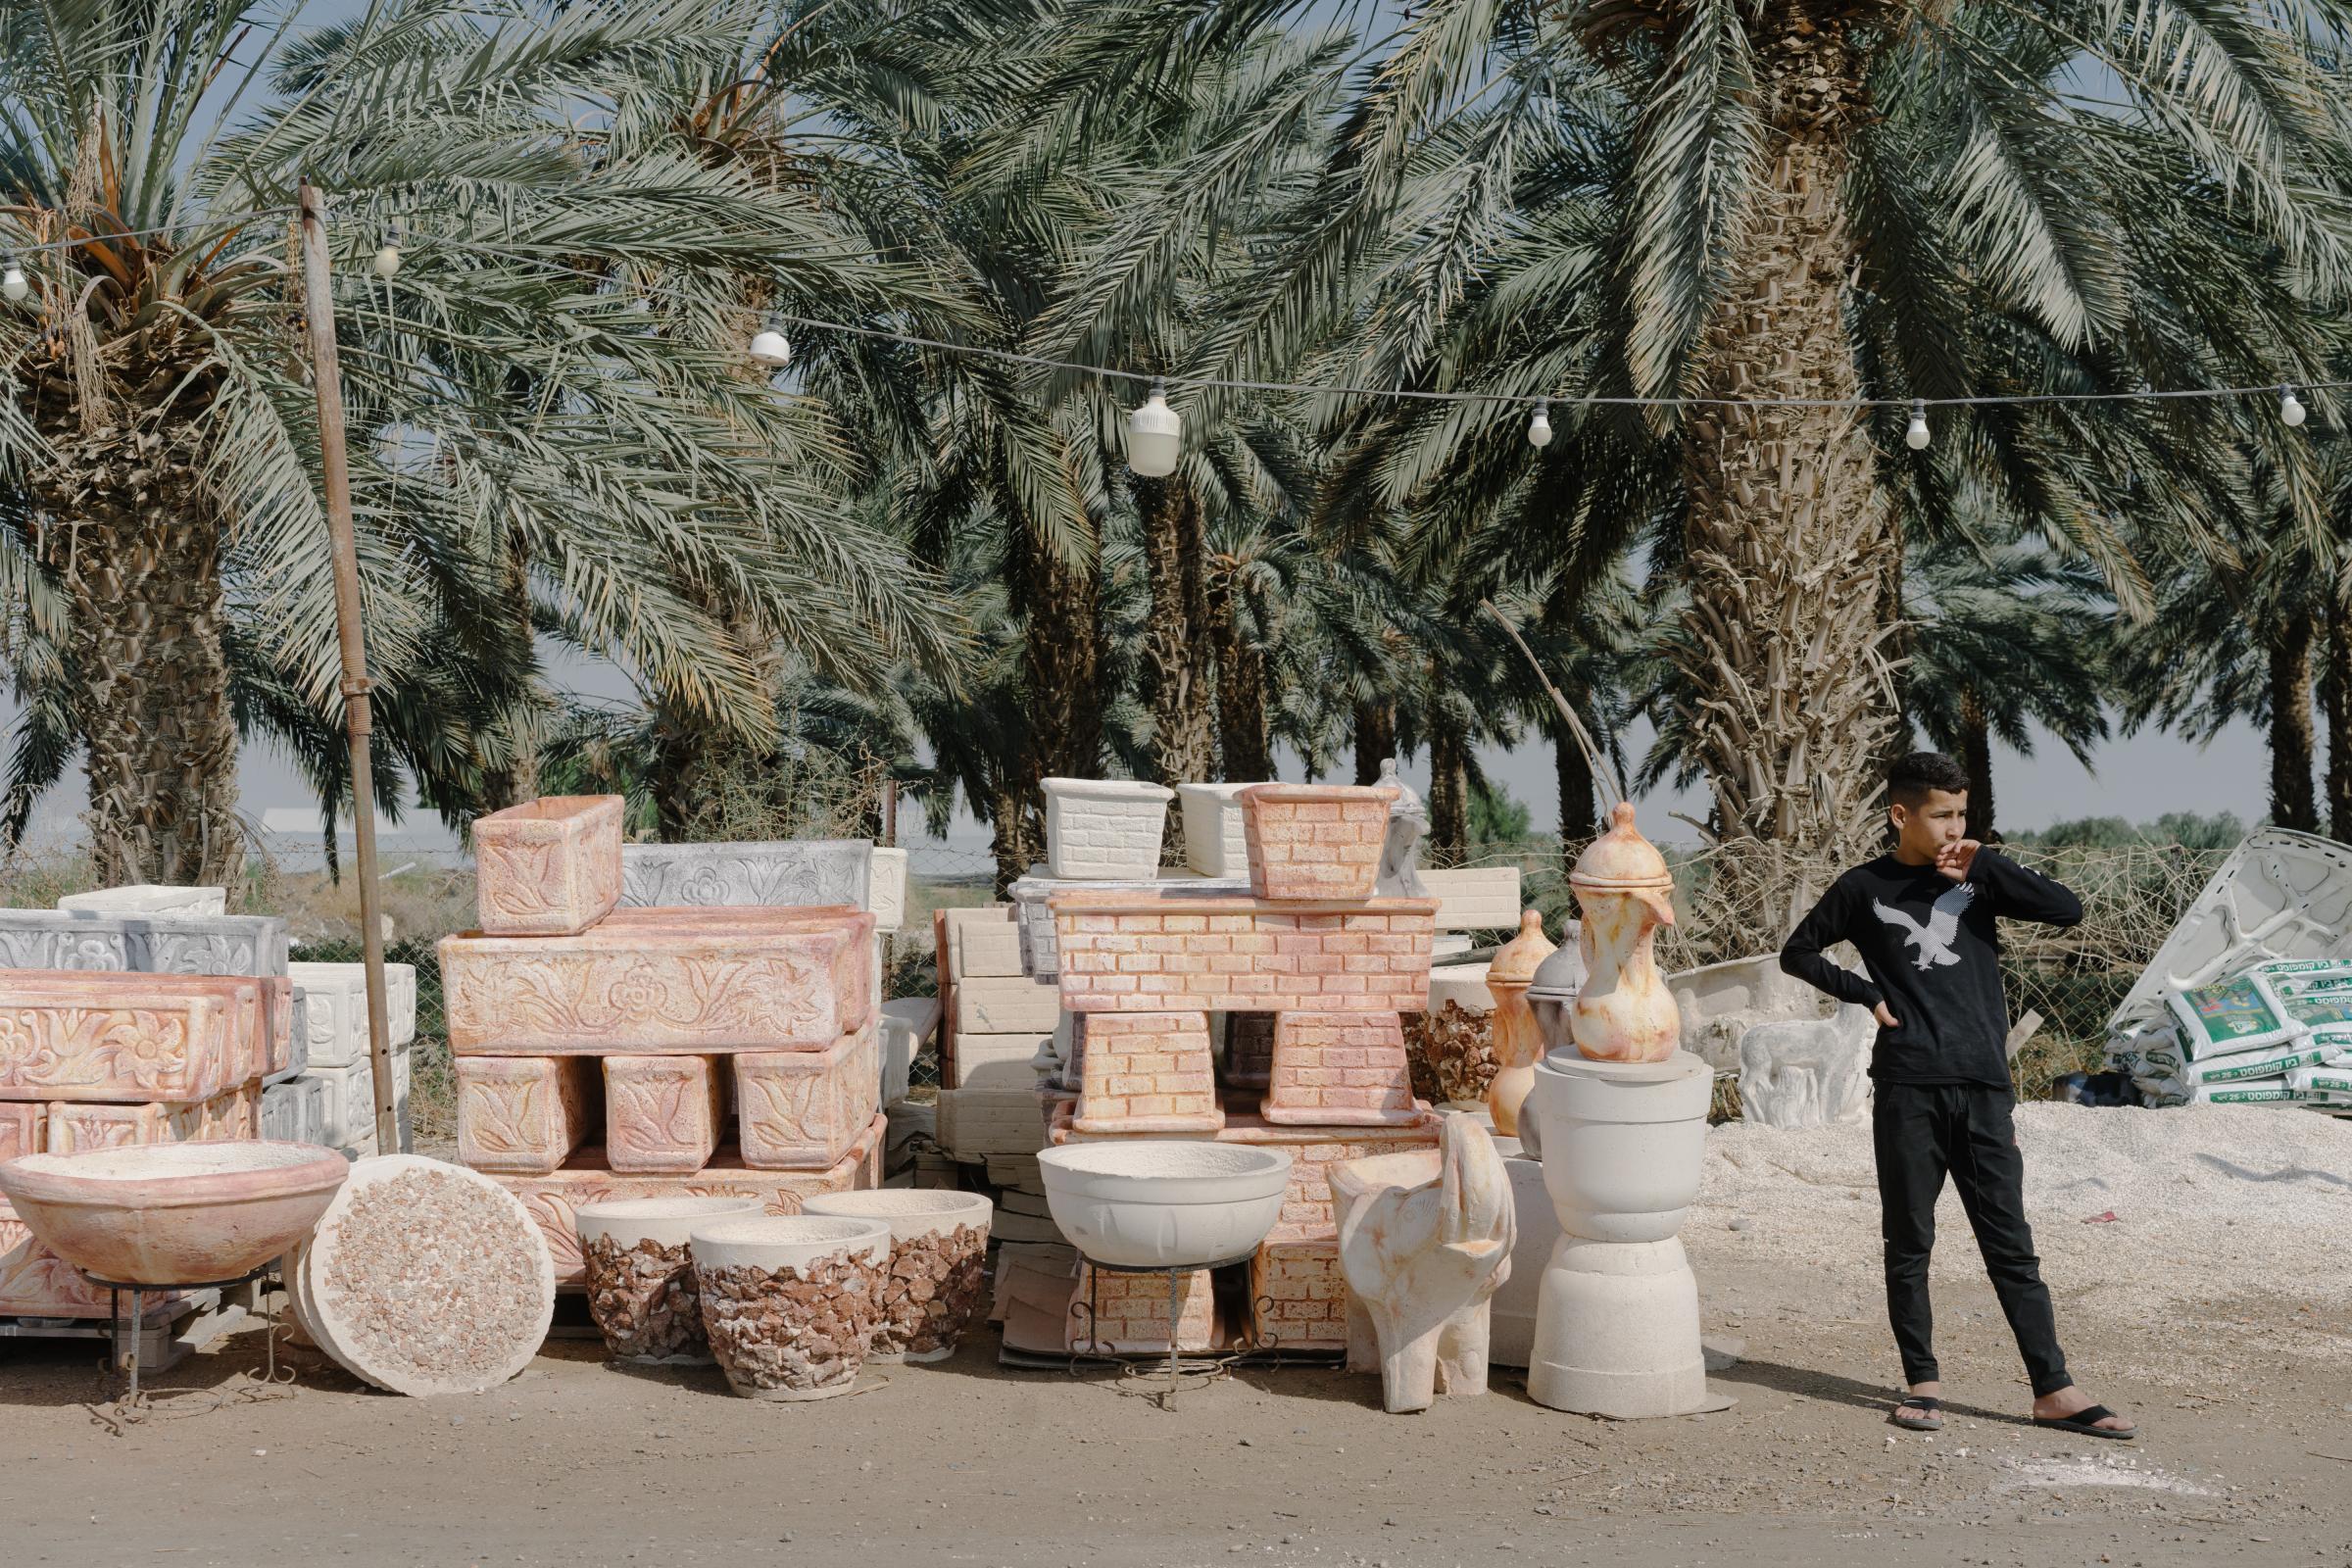 NPR - What is killing the Dead Sea? - A Palestinian child sells planters and pottery along the...